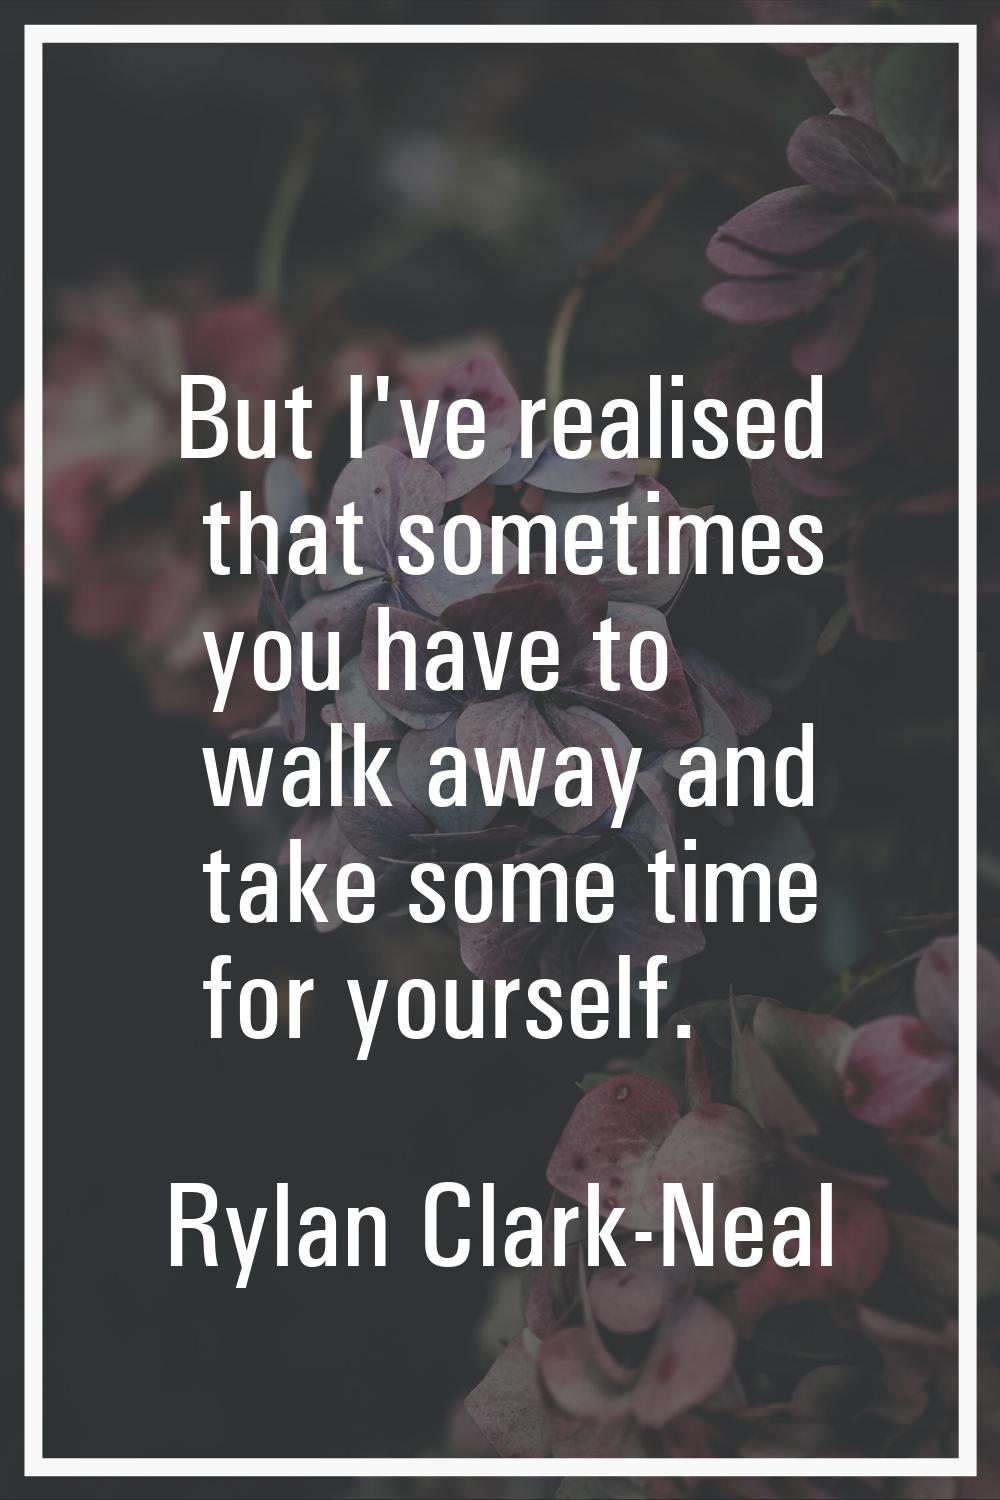 But I've realised that sometimes you have to walk away and take some time for yourself.